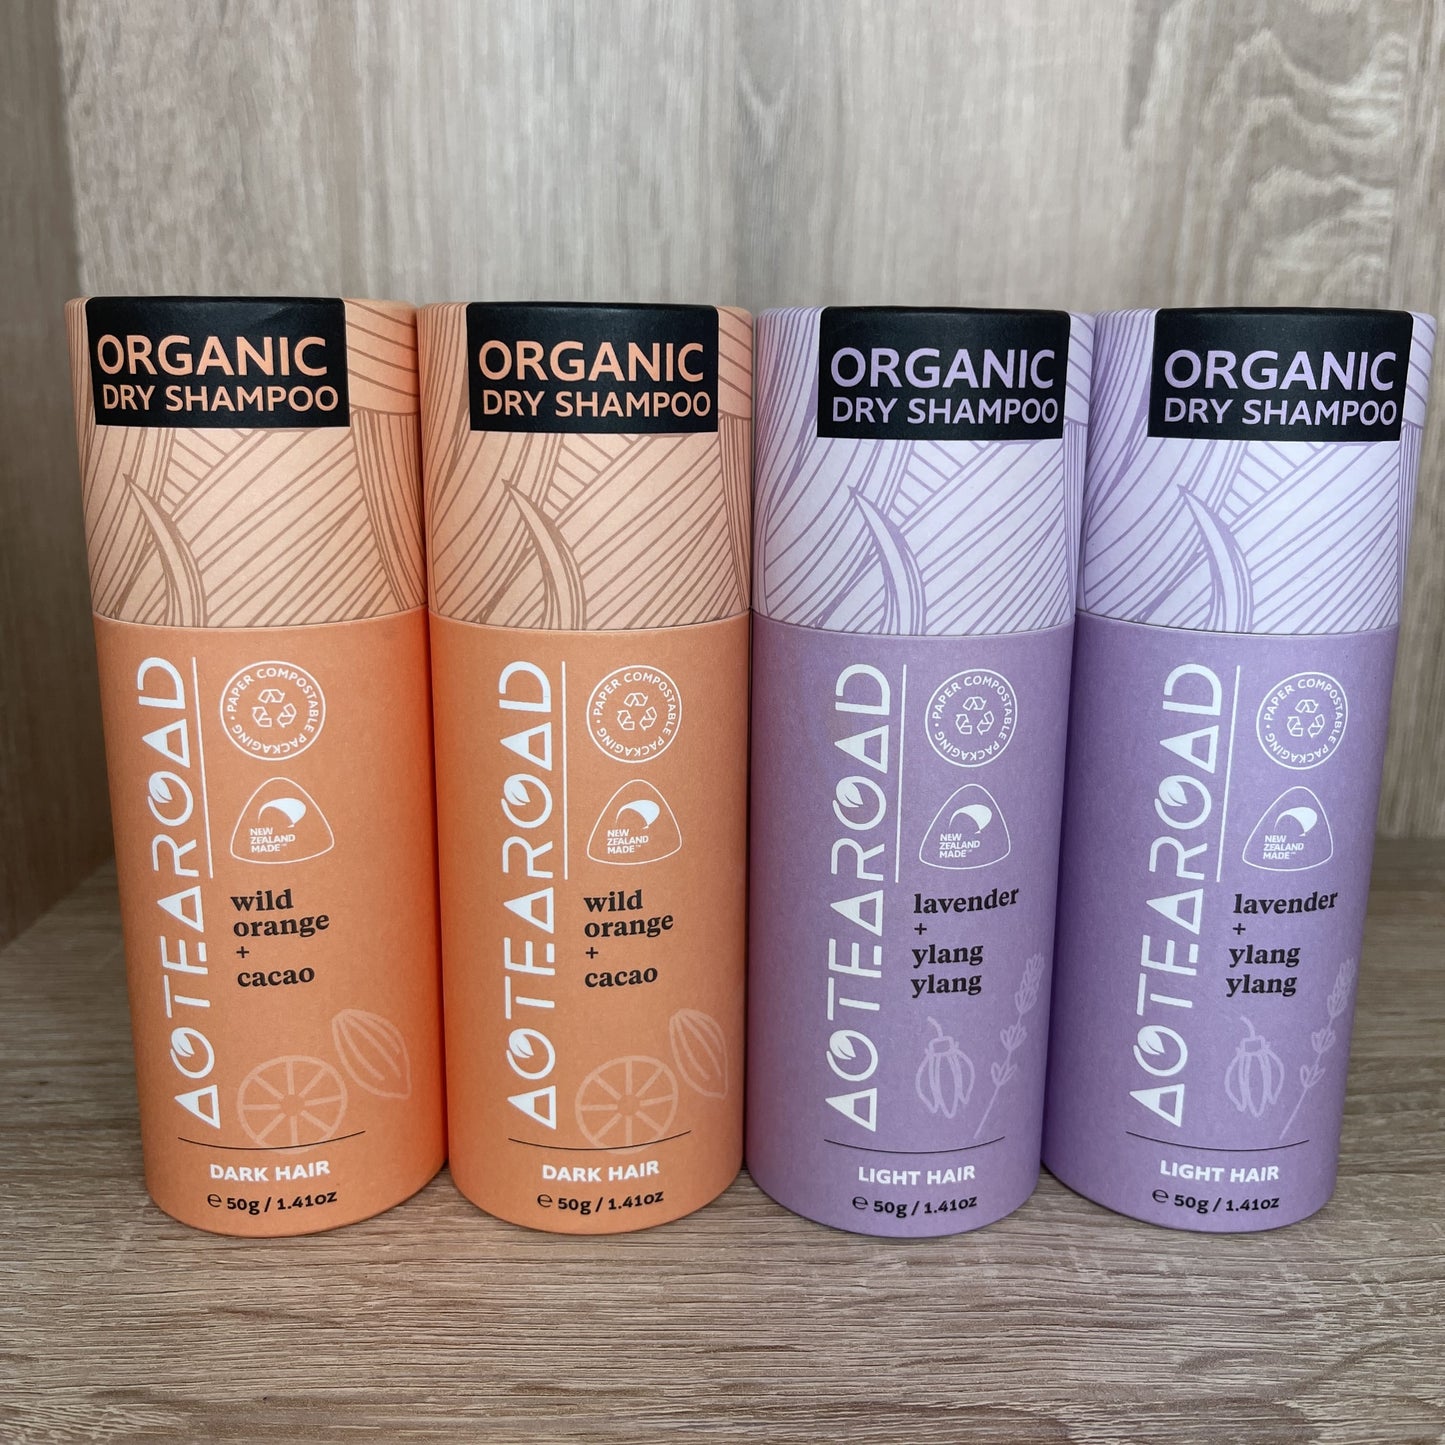 Organic dry shampoo for dark and light hair in a cardboard tube from Aotearoad.